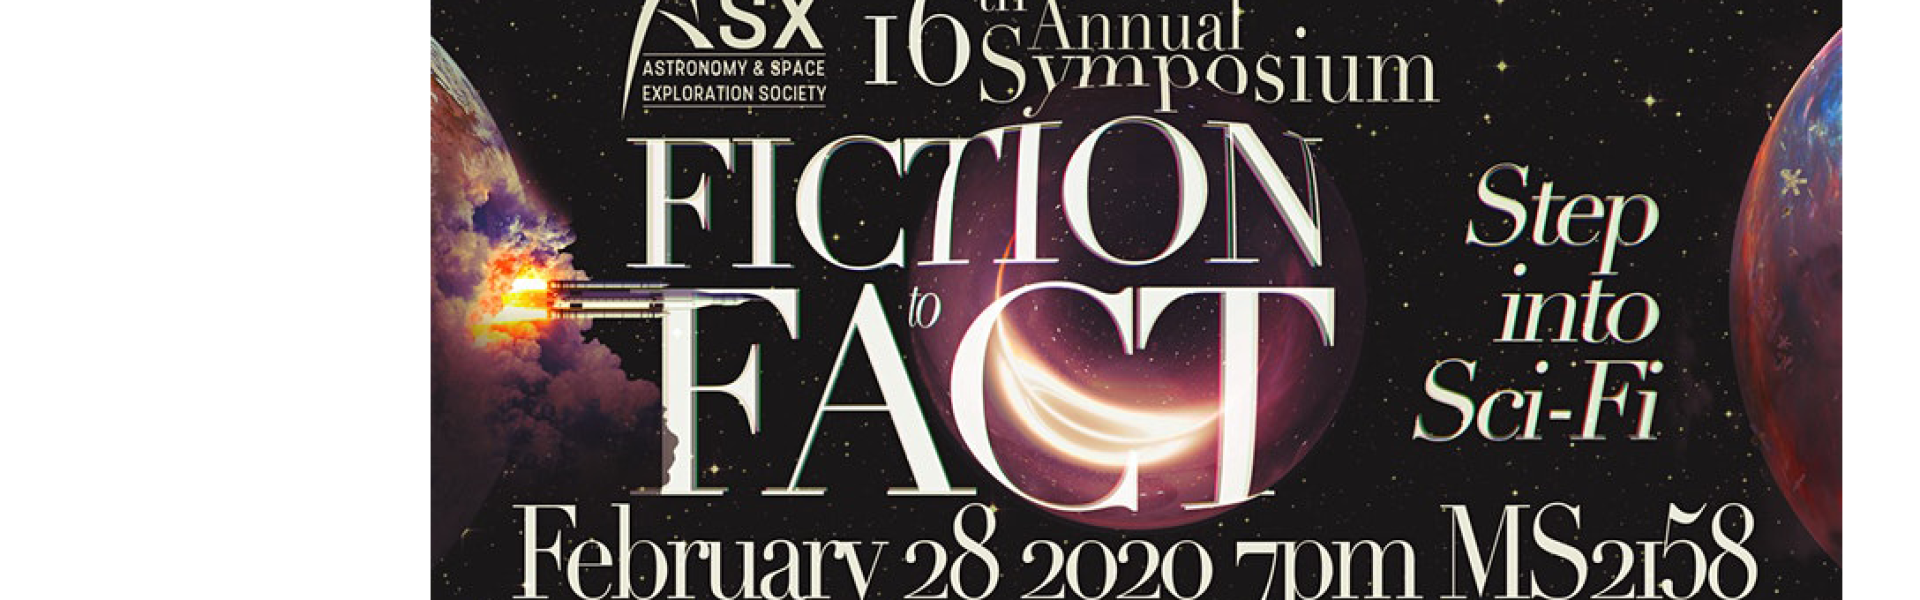 ASX Annual Symposium: Fiction to Fact: Step into Sci-Fi